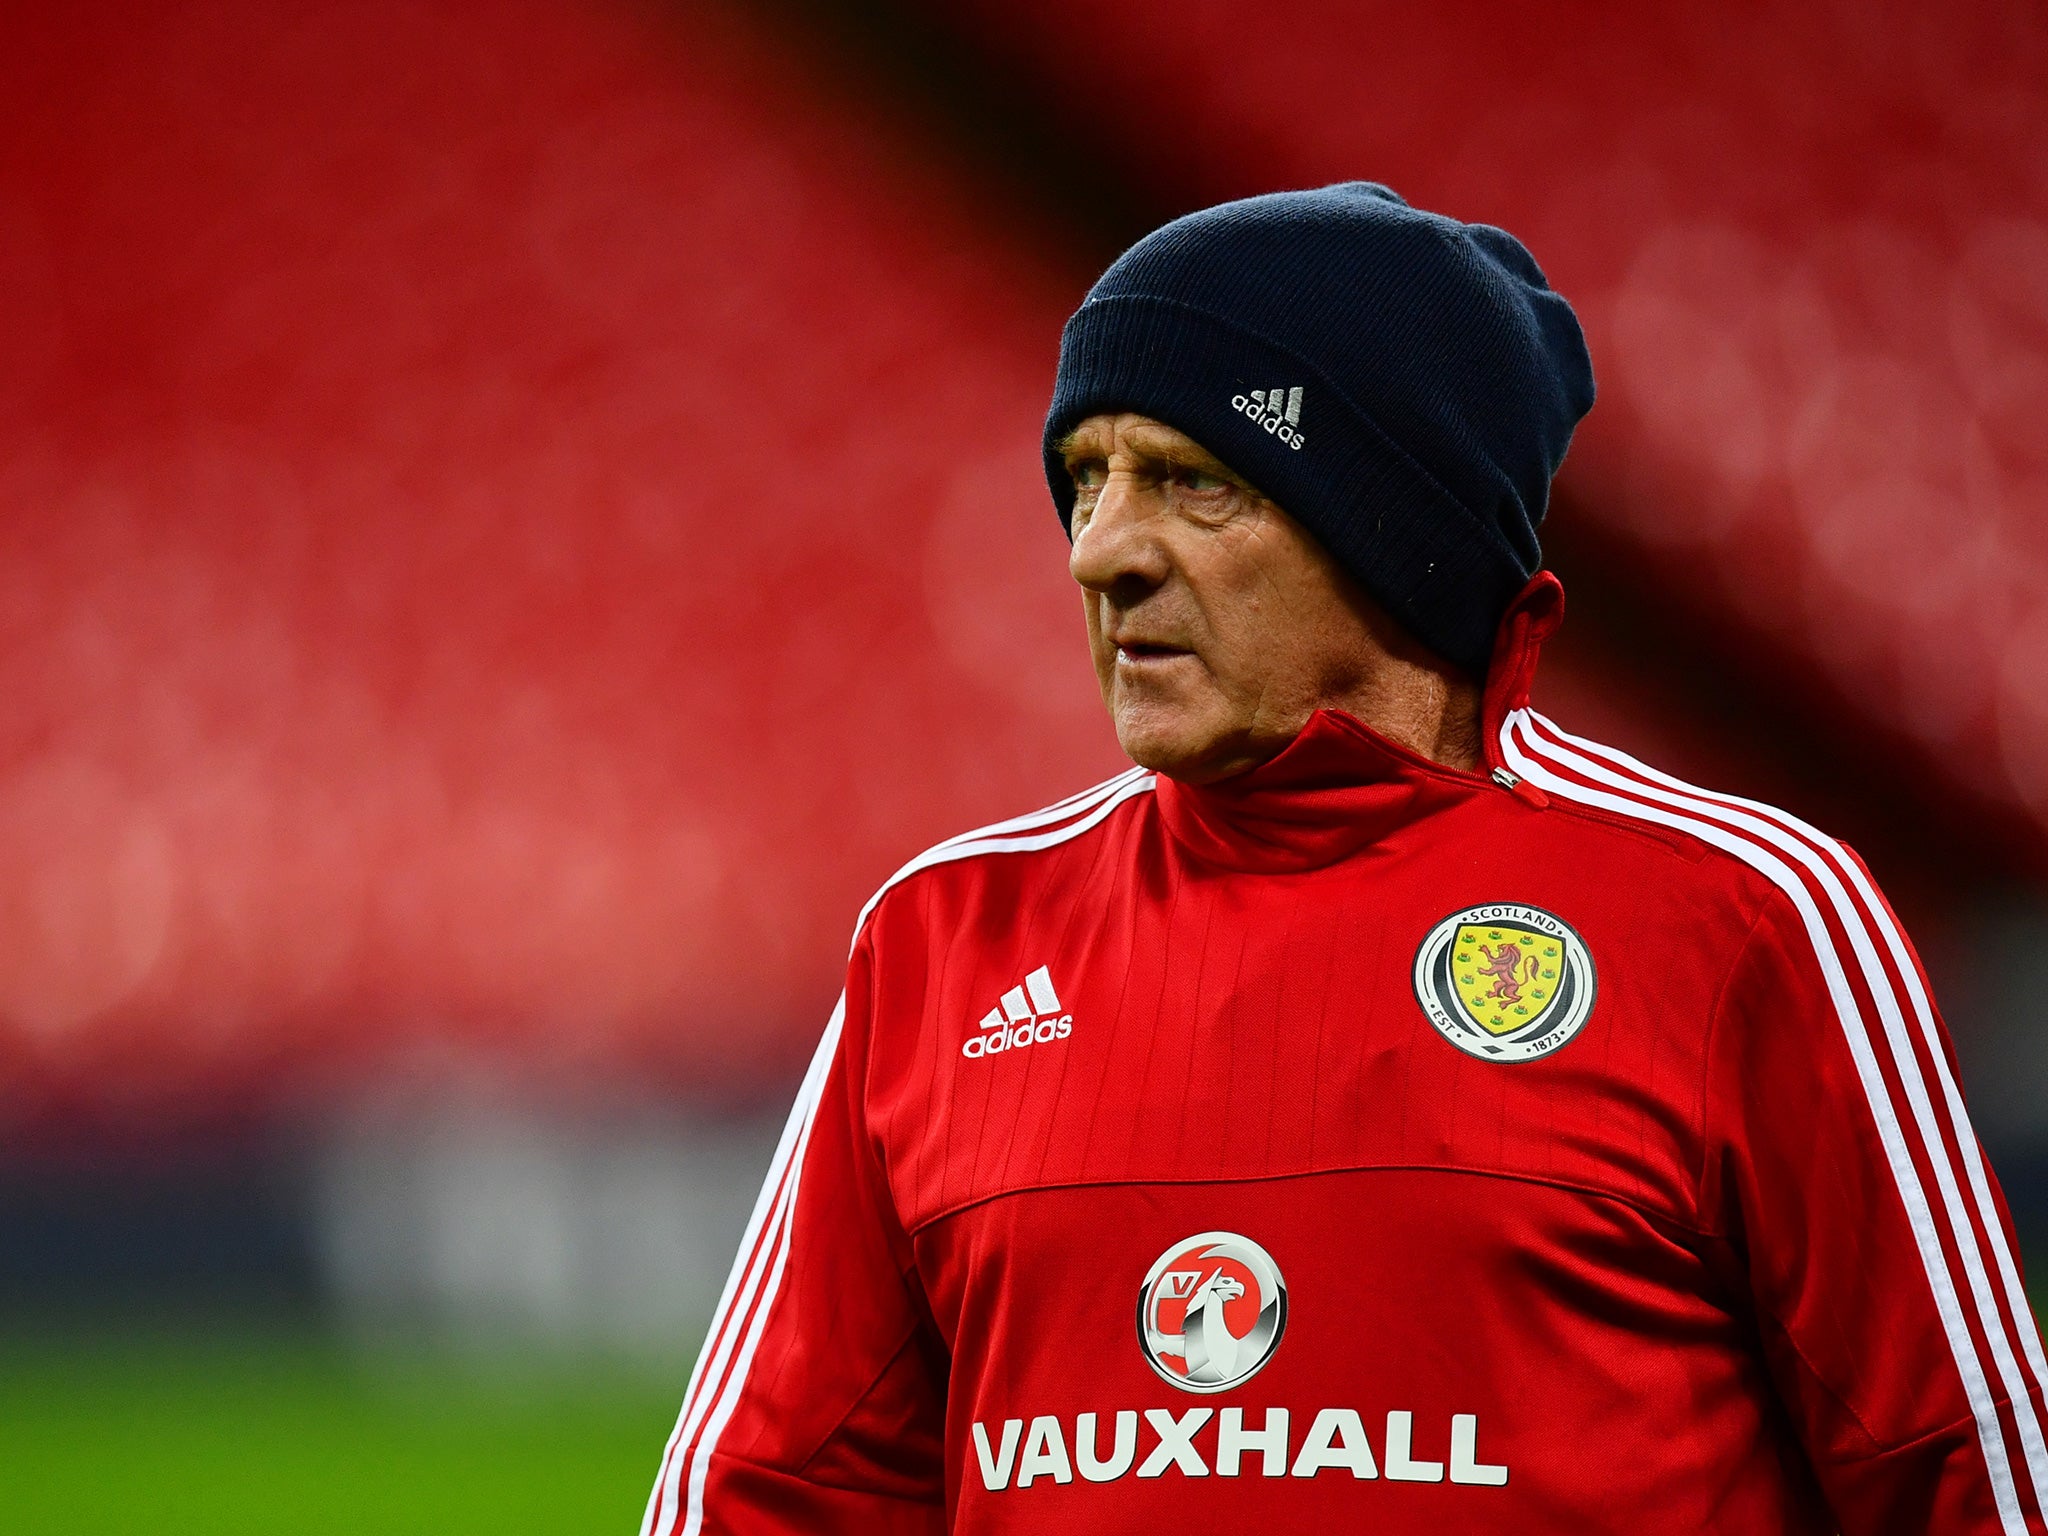 Strachan does not want to emotion of the occasion to affect his players